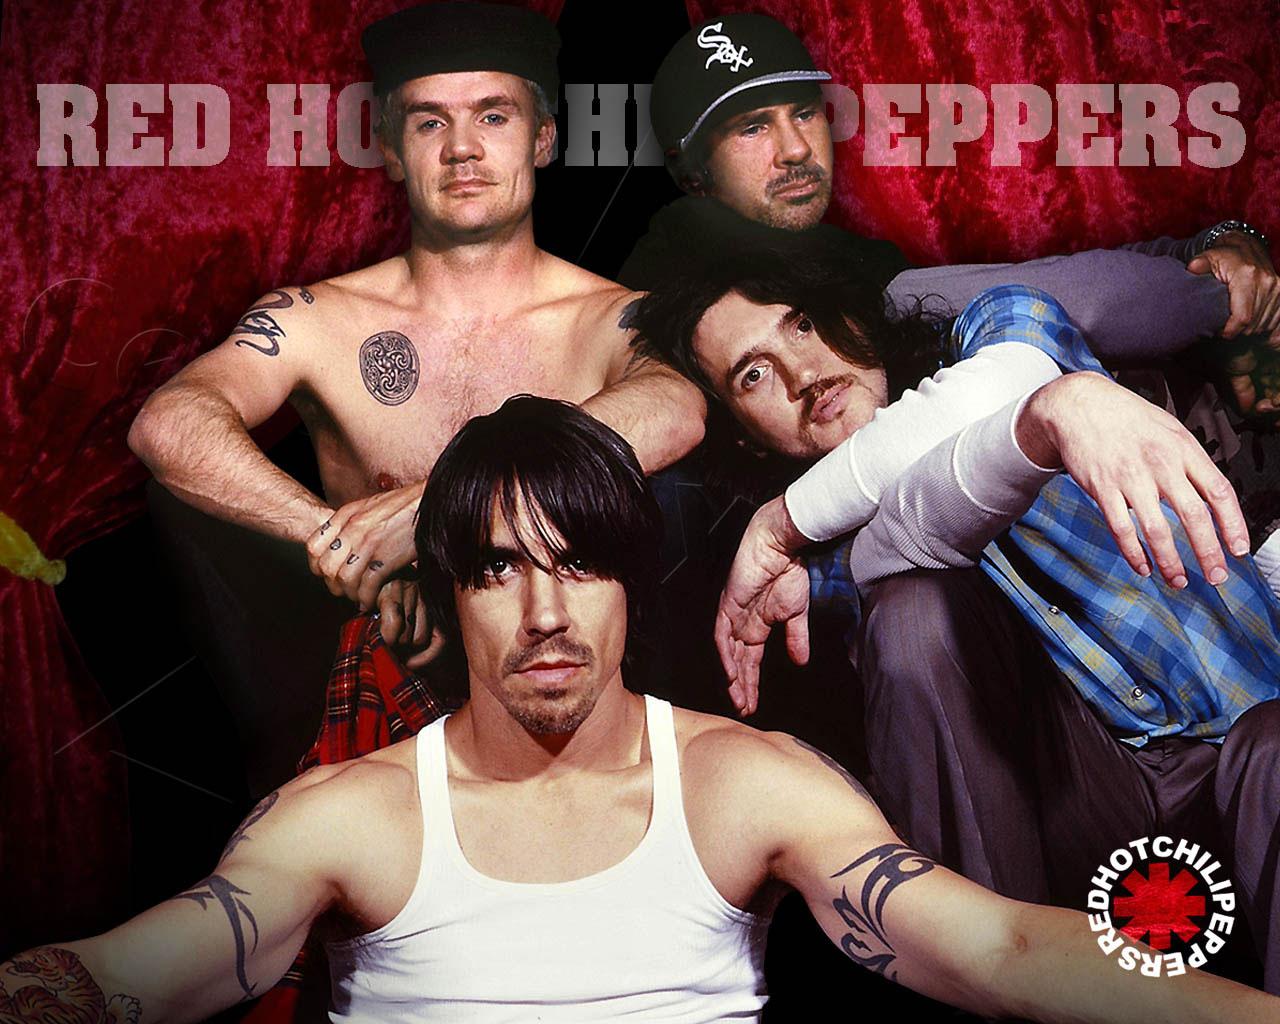 Red Hot Chilli Peppers Wallpaper #1 1280 x 1024 